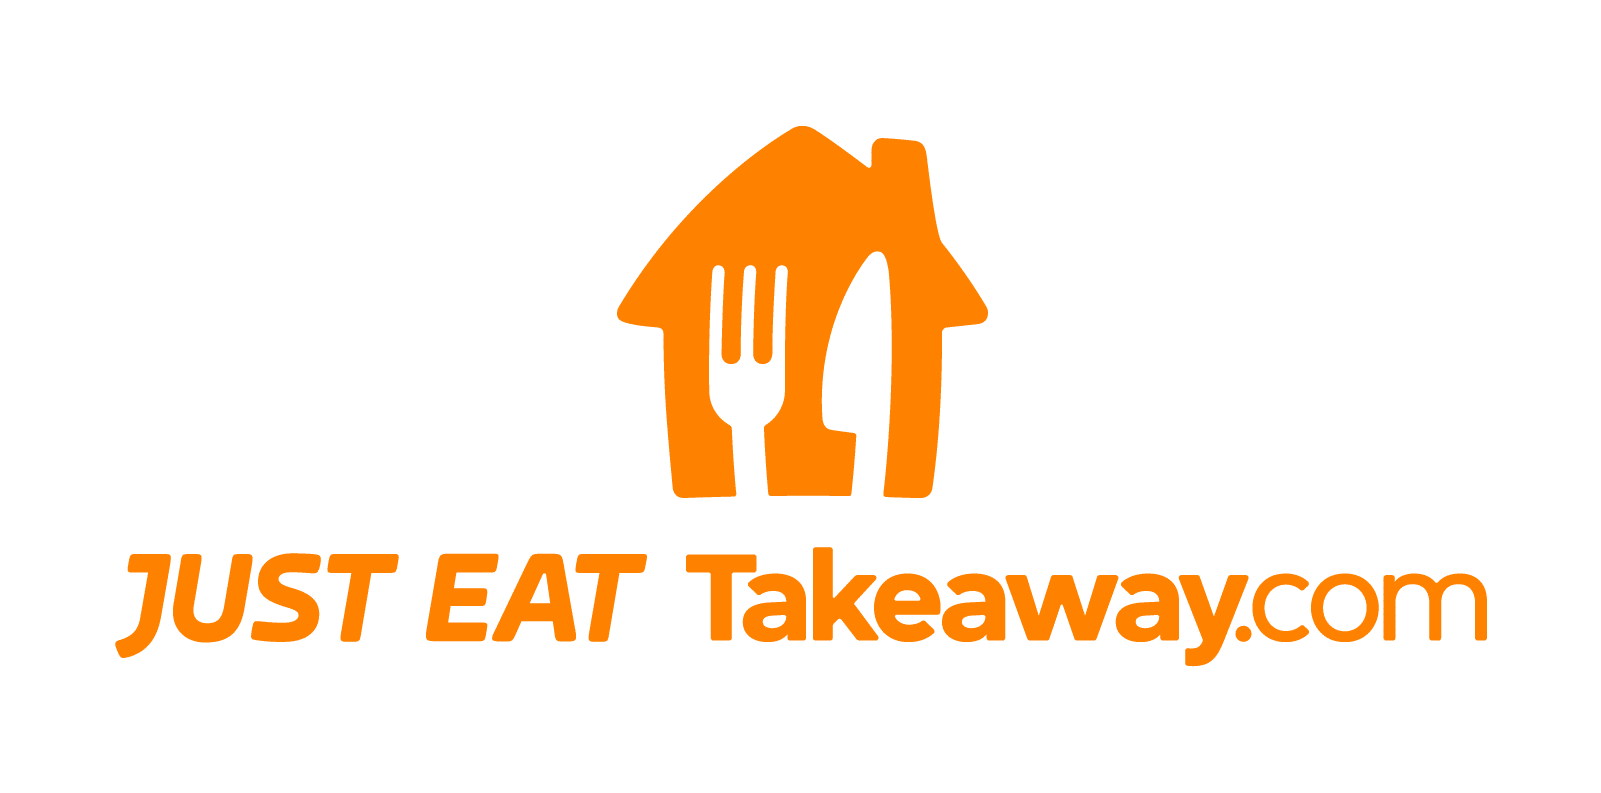 Just Eat Takeaway.com Share Price Forecast August 2021 ...